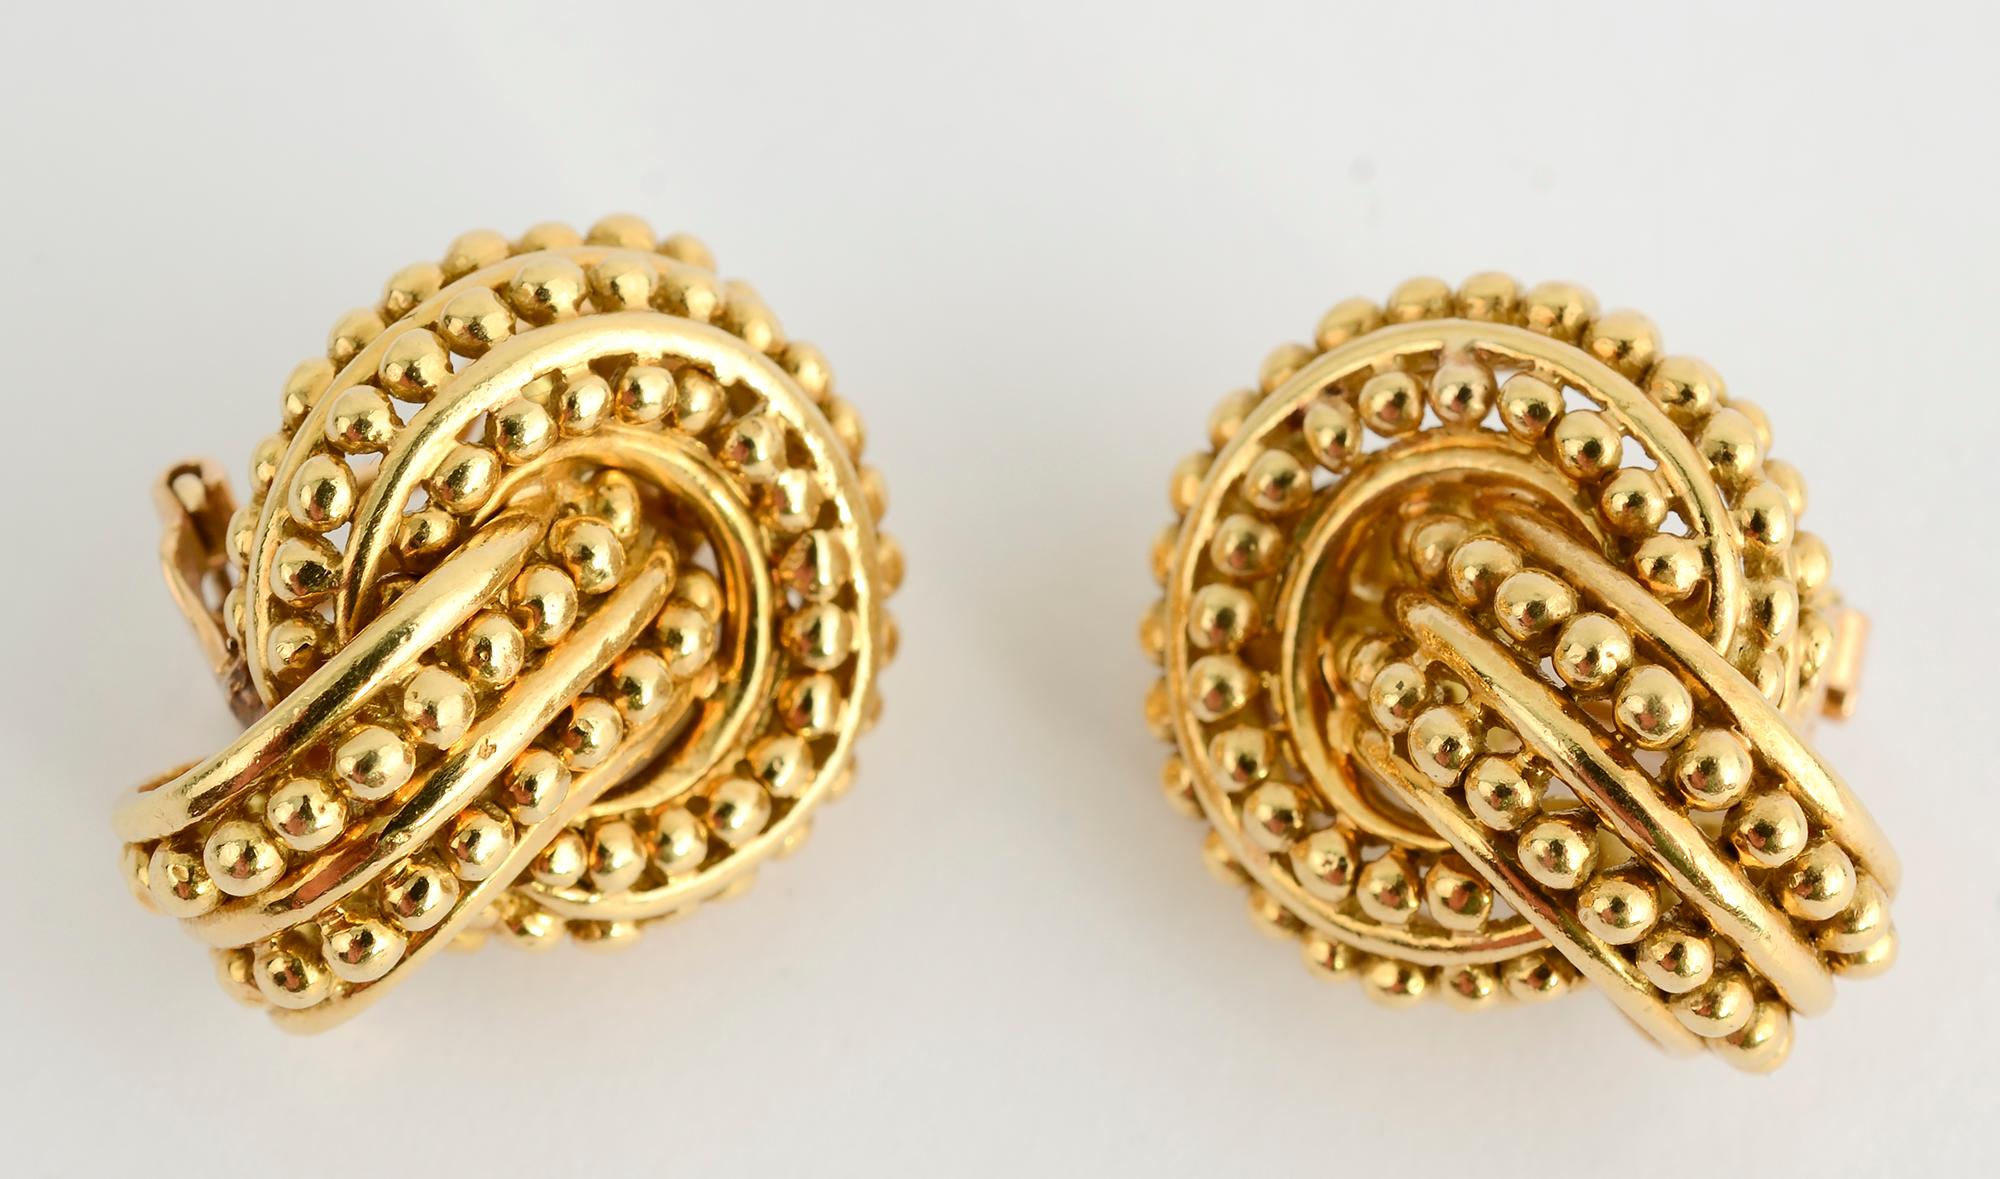 Wonderfully textured and sculptural earrings by Tiffany. An oval half hoop, set on a slight angle, intertwines with a gold circle. Three rows of gold beading are on the circle and two rows on the oval. The earrings measure 1 inch long and 3/4 inch